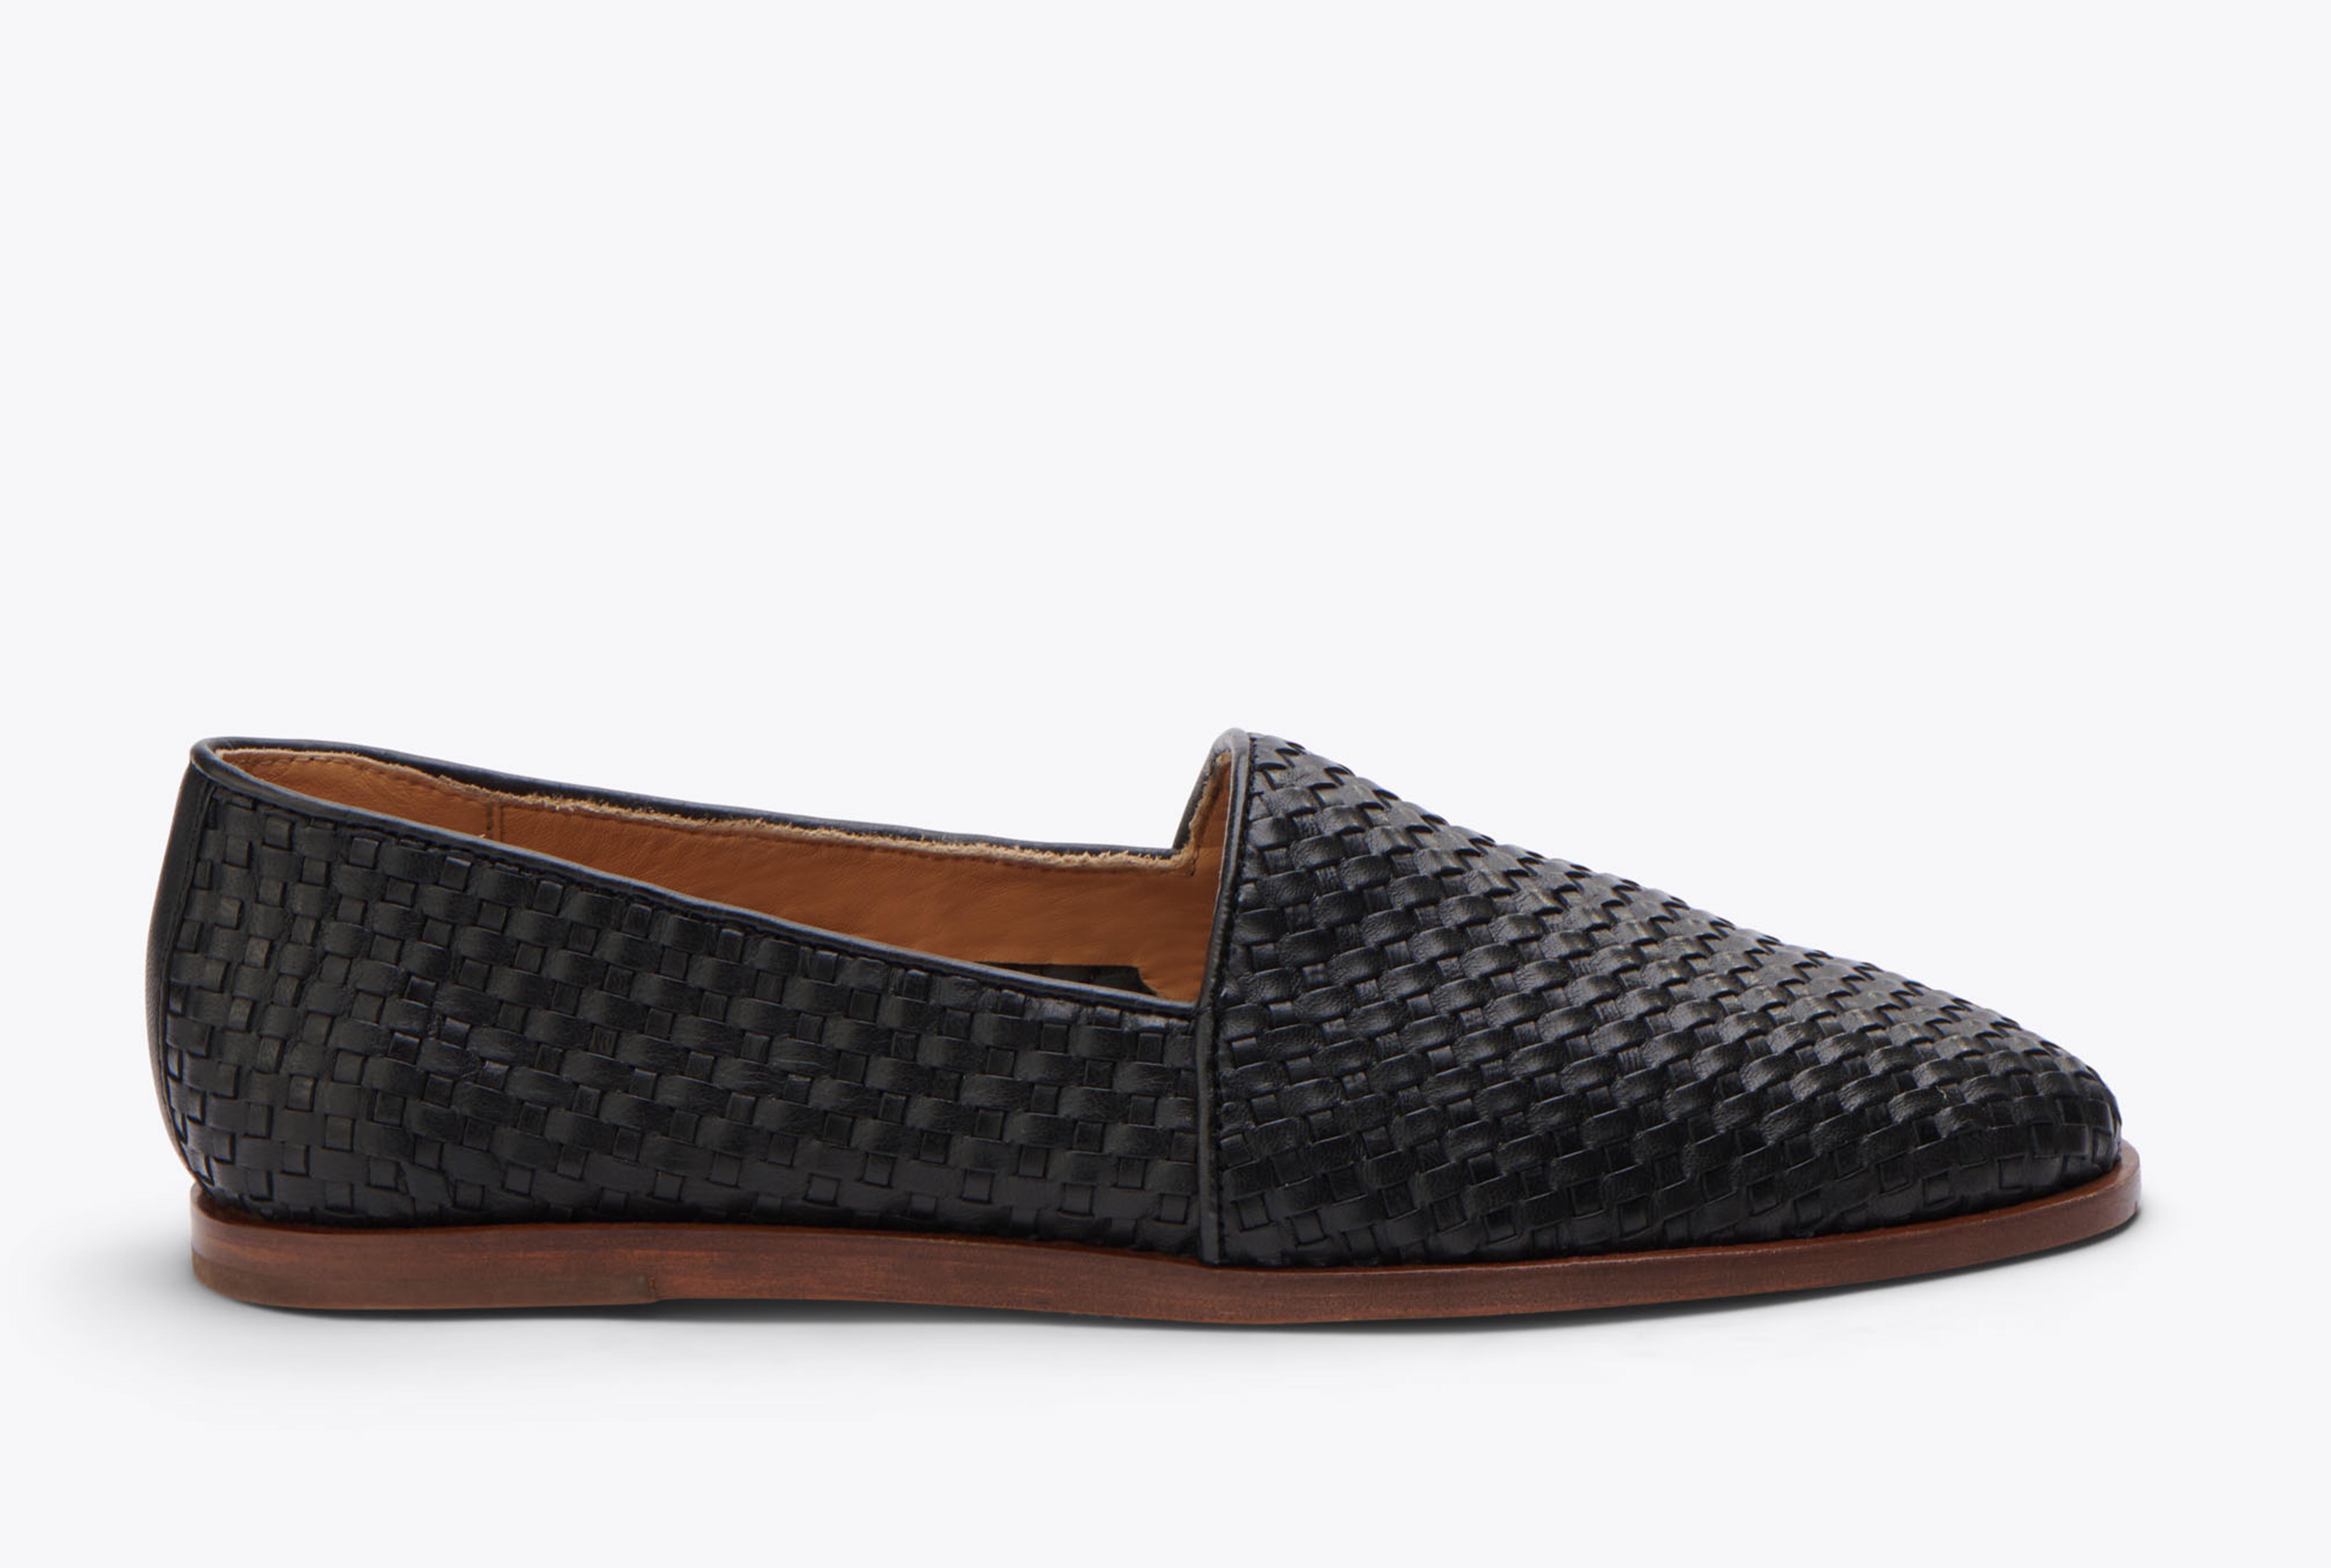 Nisolo Alejandro Woven Slip On Woven Black - Every Nisolo product is built on the foundation of comfort, function, and design. 